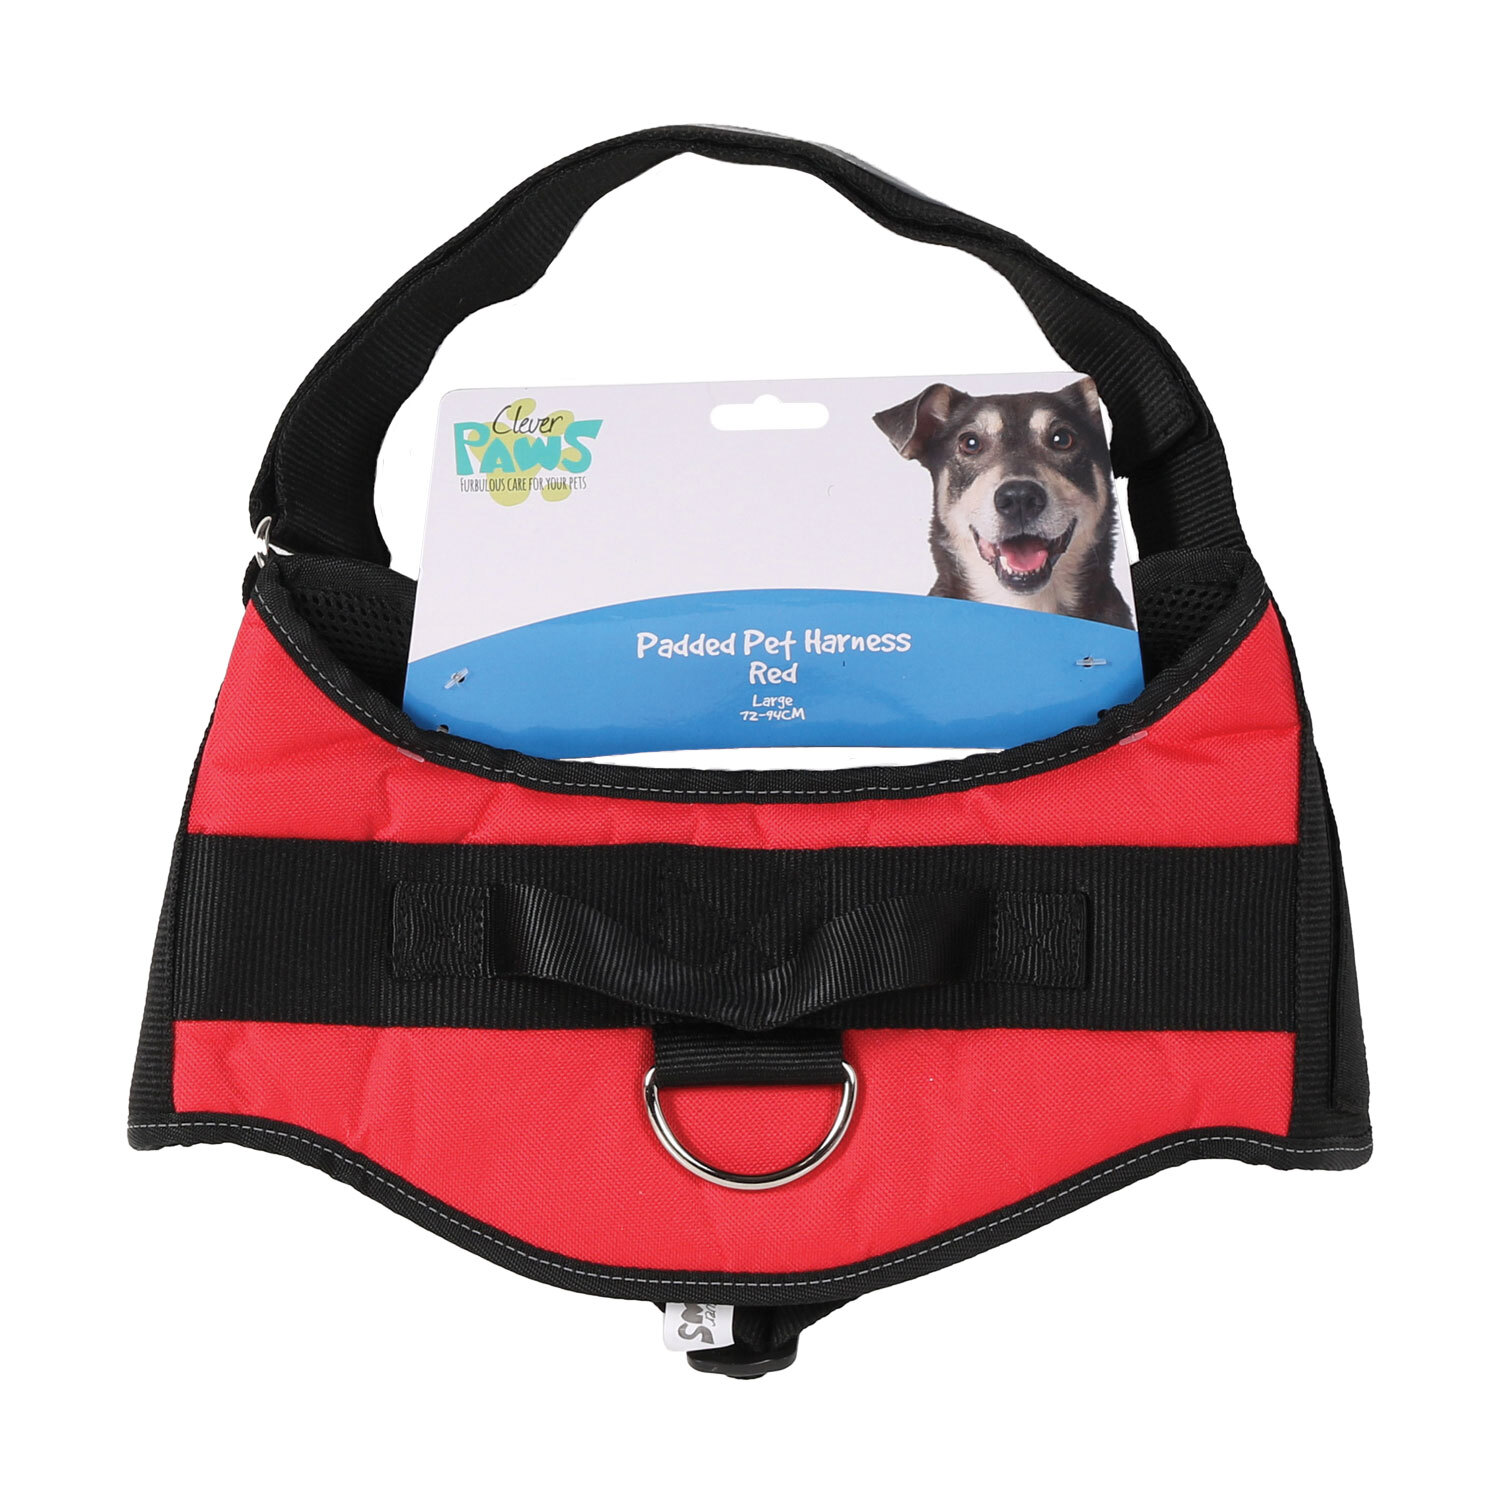 Padded Dog Harness - Red / L Image 1